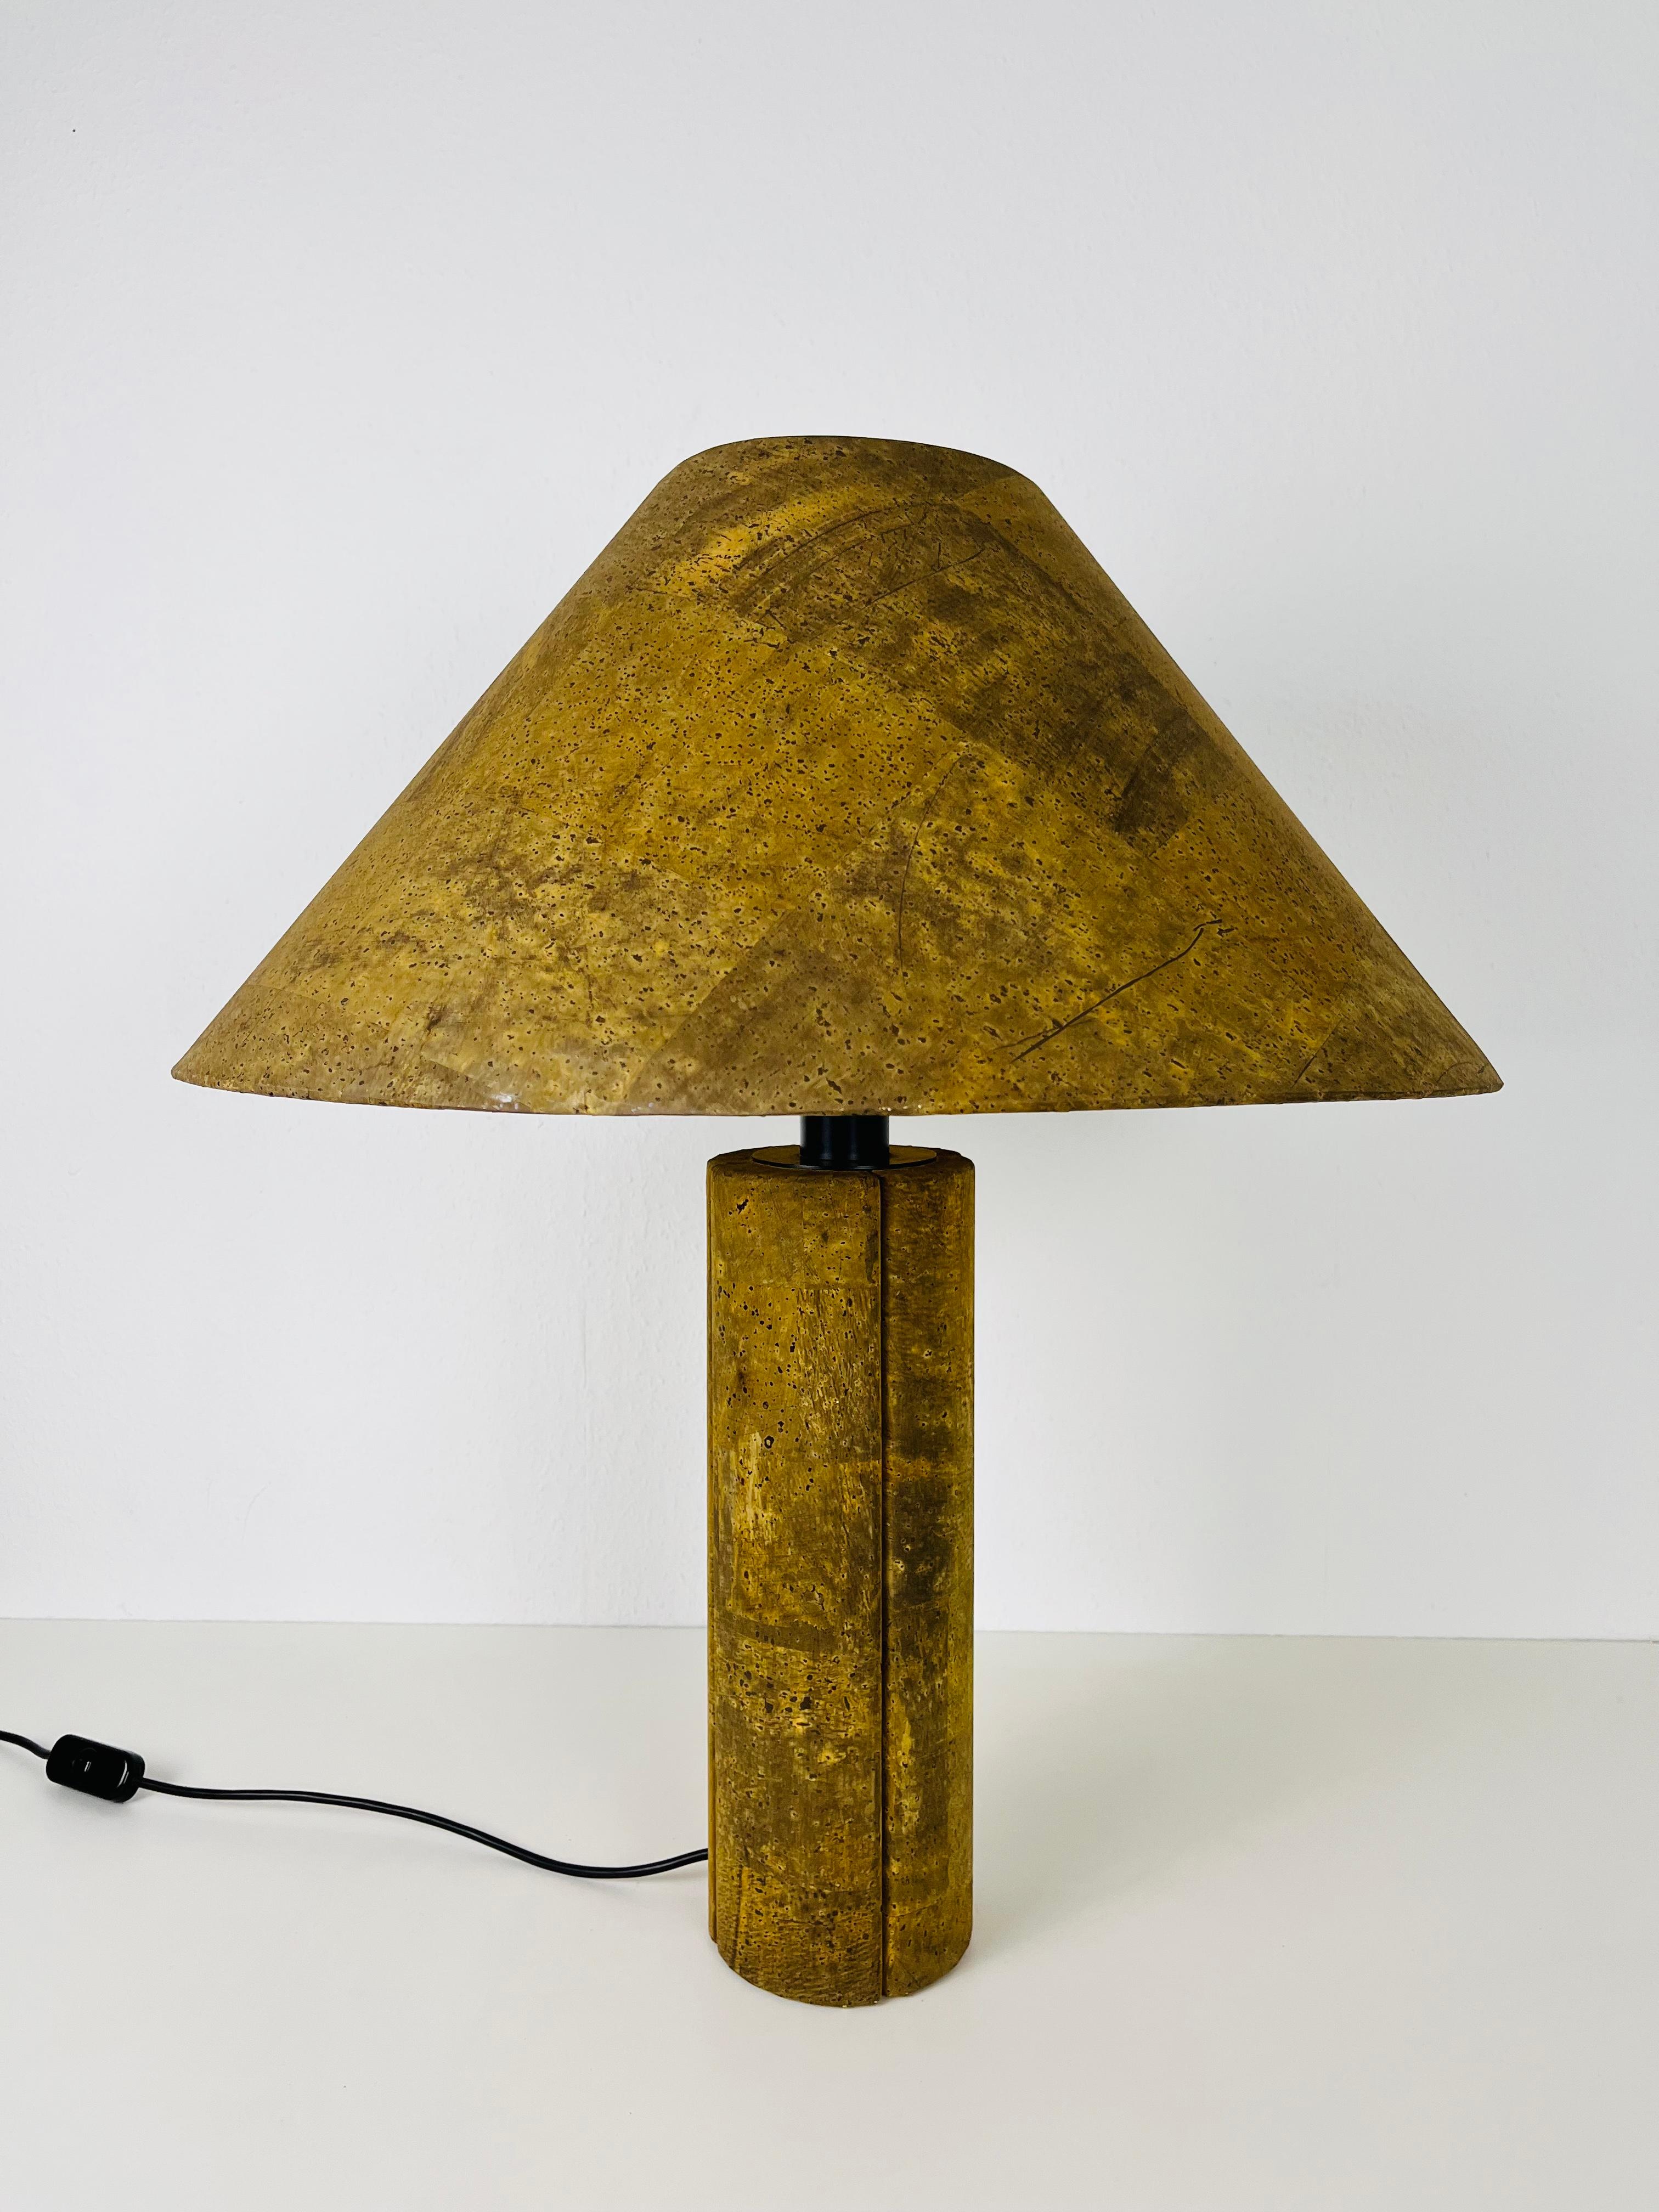 Iconic table lamp by Ingo Maurer made in the 1960s. The lighting is made of cork. The base has a wonderful cylinder shape.

The light requires one E27 (US E26) light bulb. Works with both 120/220V. Good vintage condition.

Free worldwide express